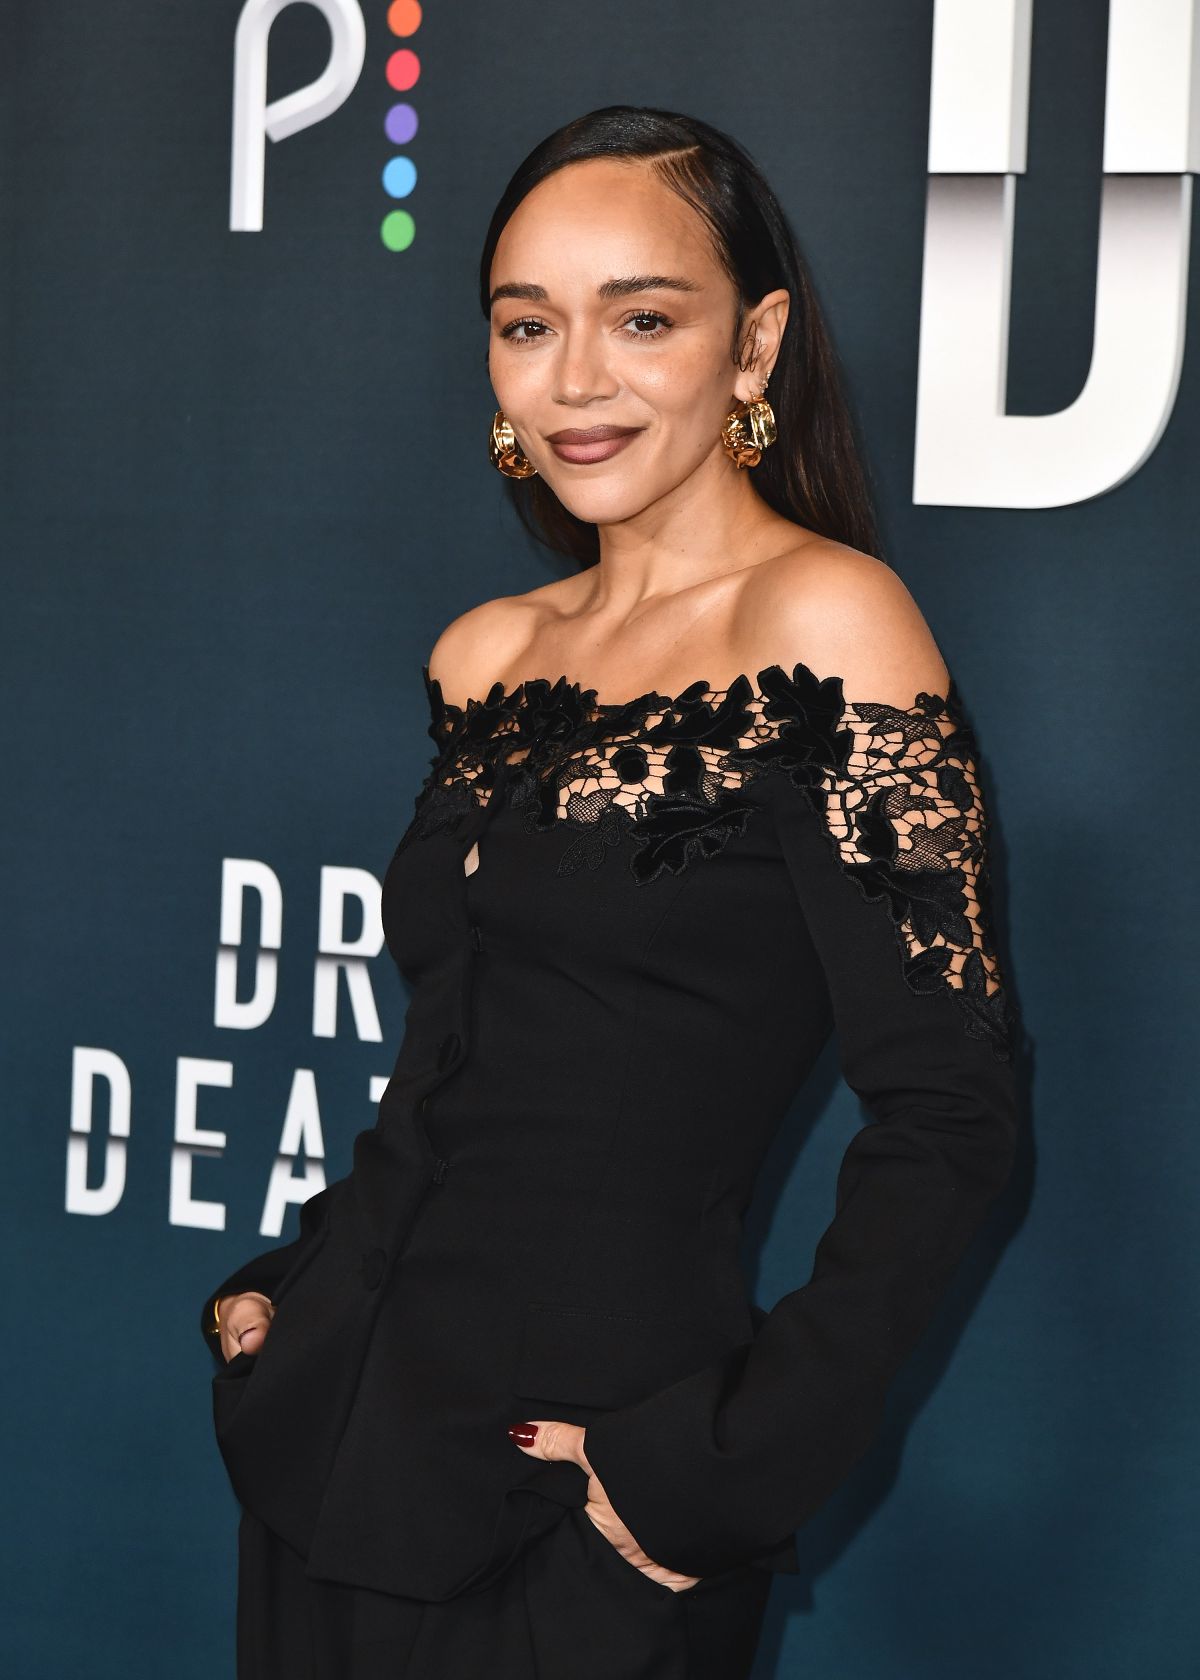 Ashley Madekwe at Dr Death Season 2 Premiere in Red Carpet Glam 1